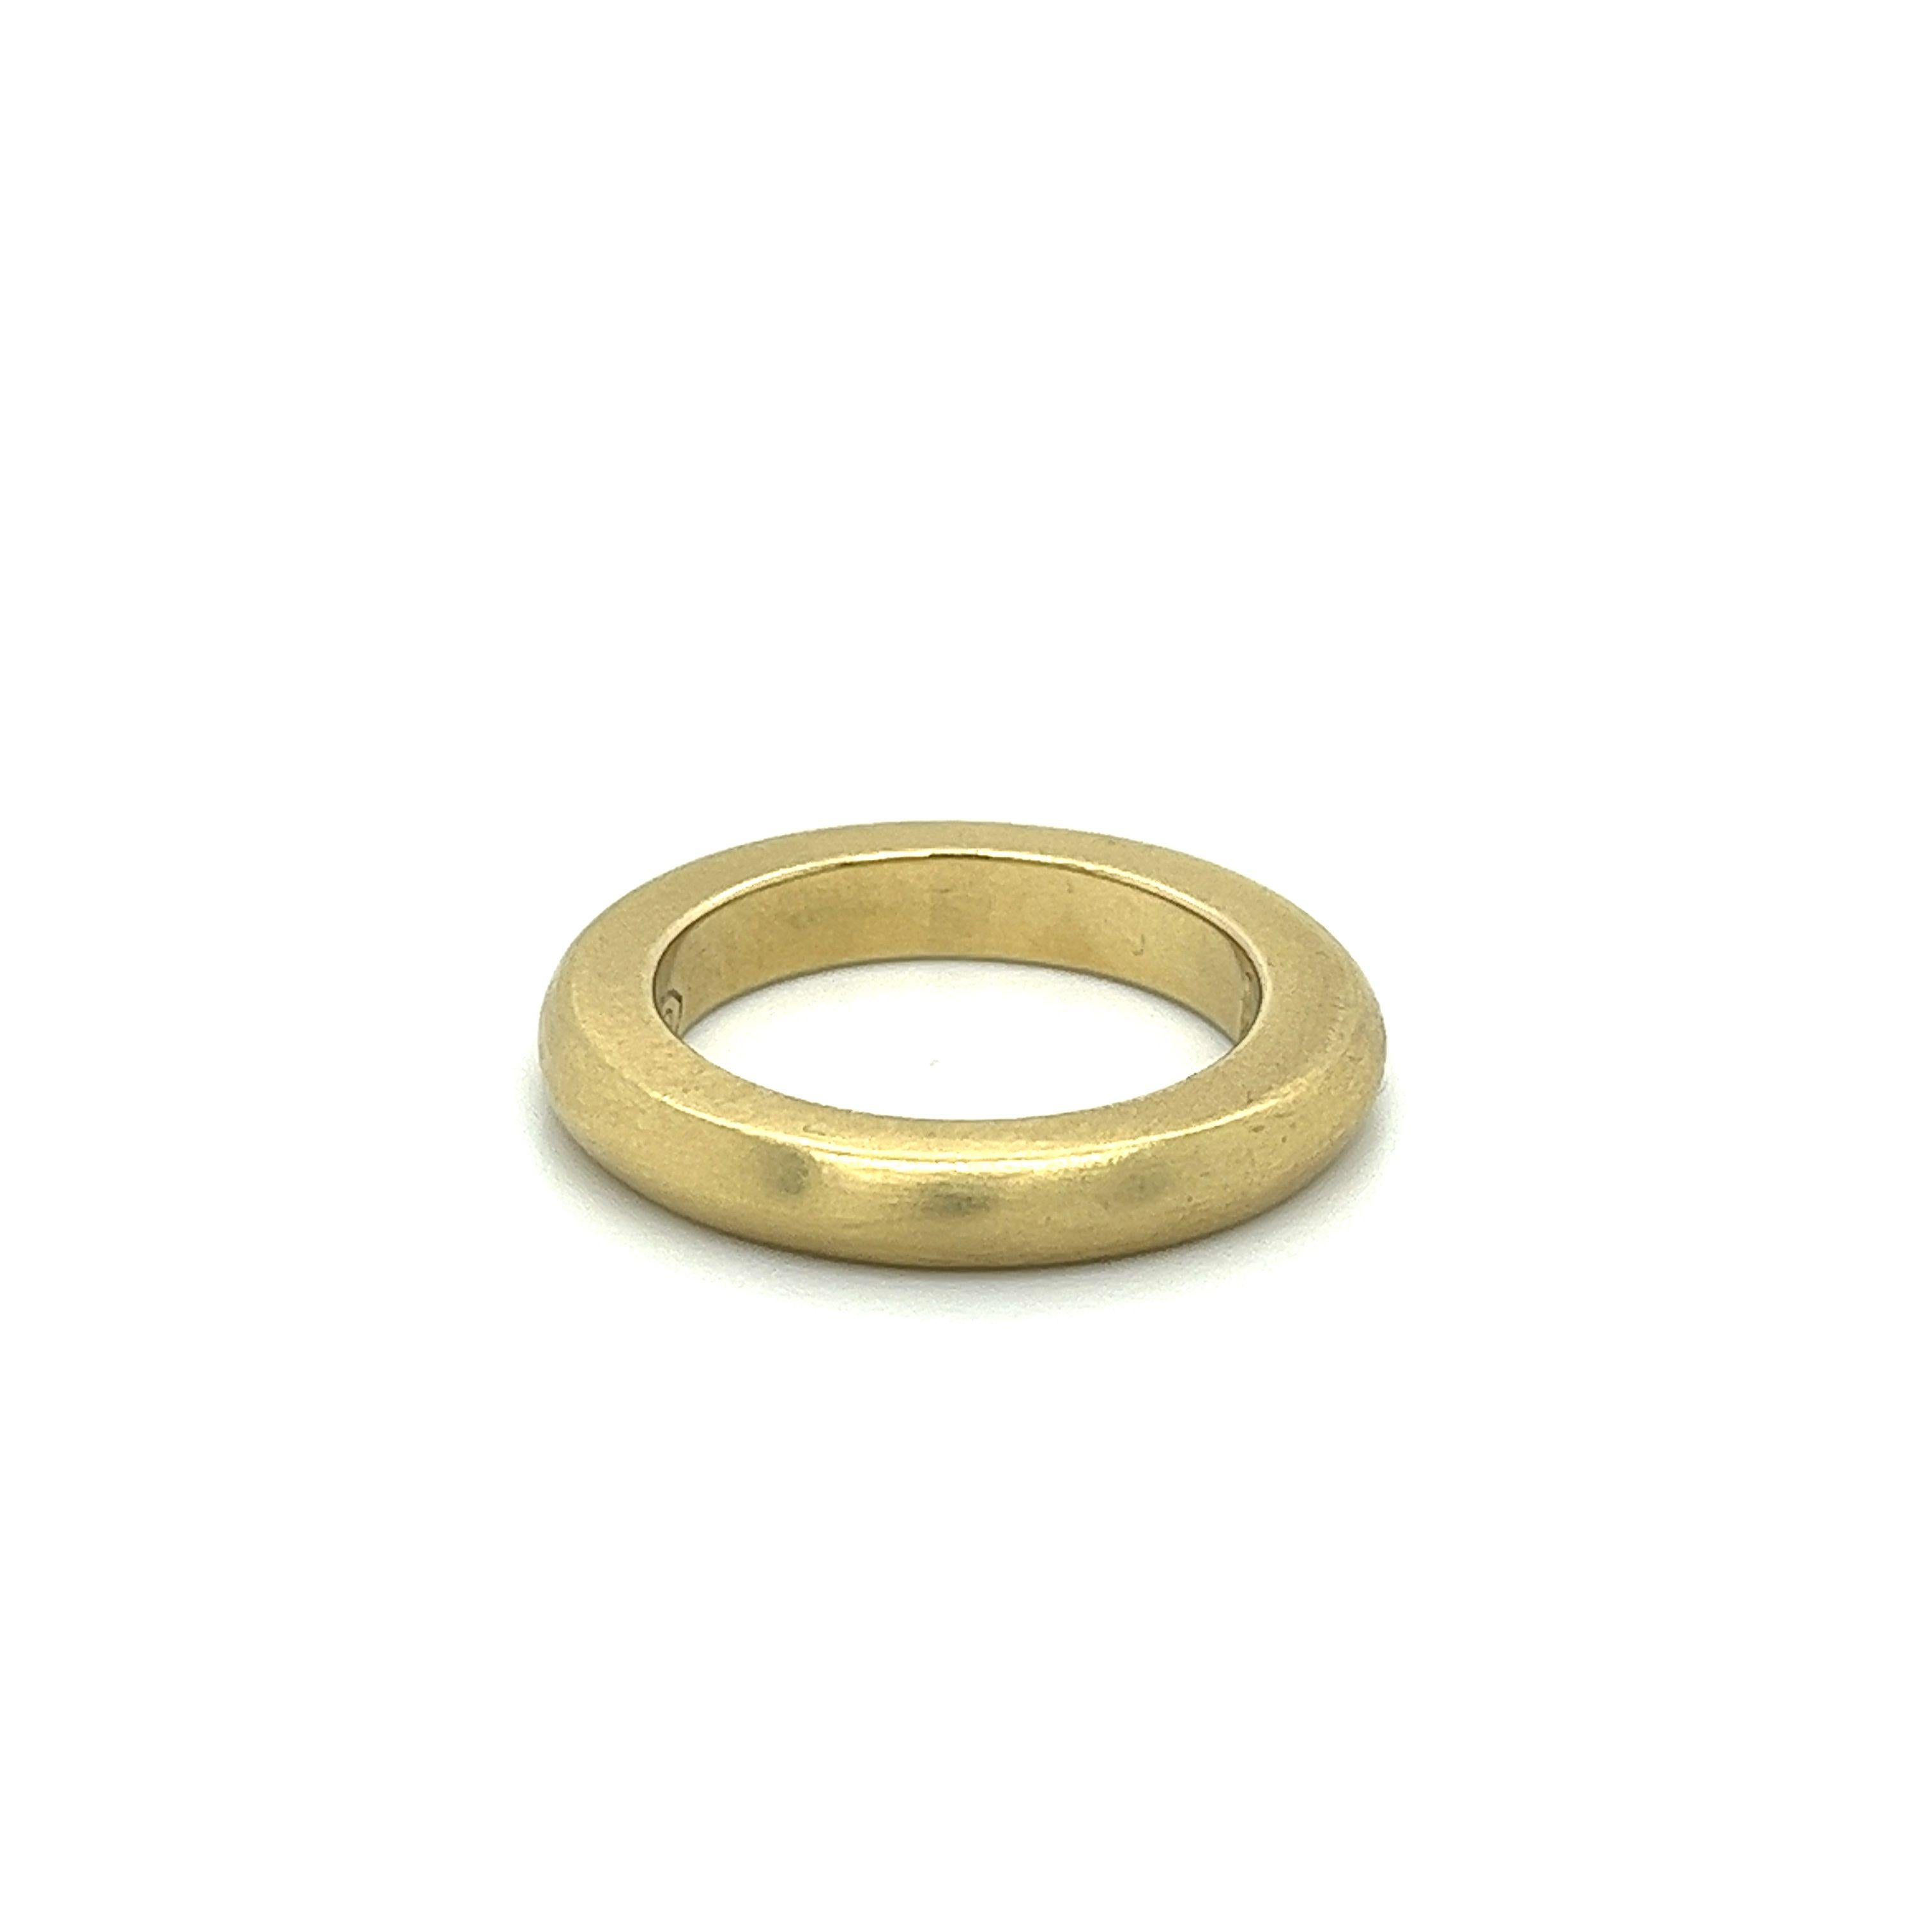 A 14k solid gold ring by Mignon Faget with a brushed gold finish is the epitome of sophistication. This rounded and thick ring is designed to sit prominently above the finger, making it a statement piece that's sure to turn heads.

Comes with free